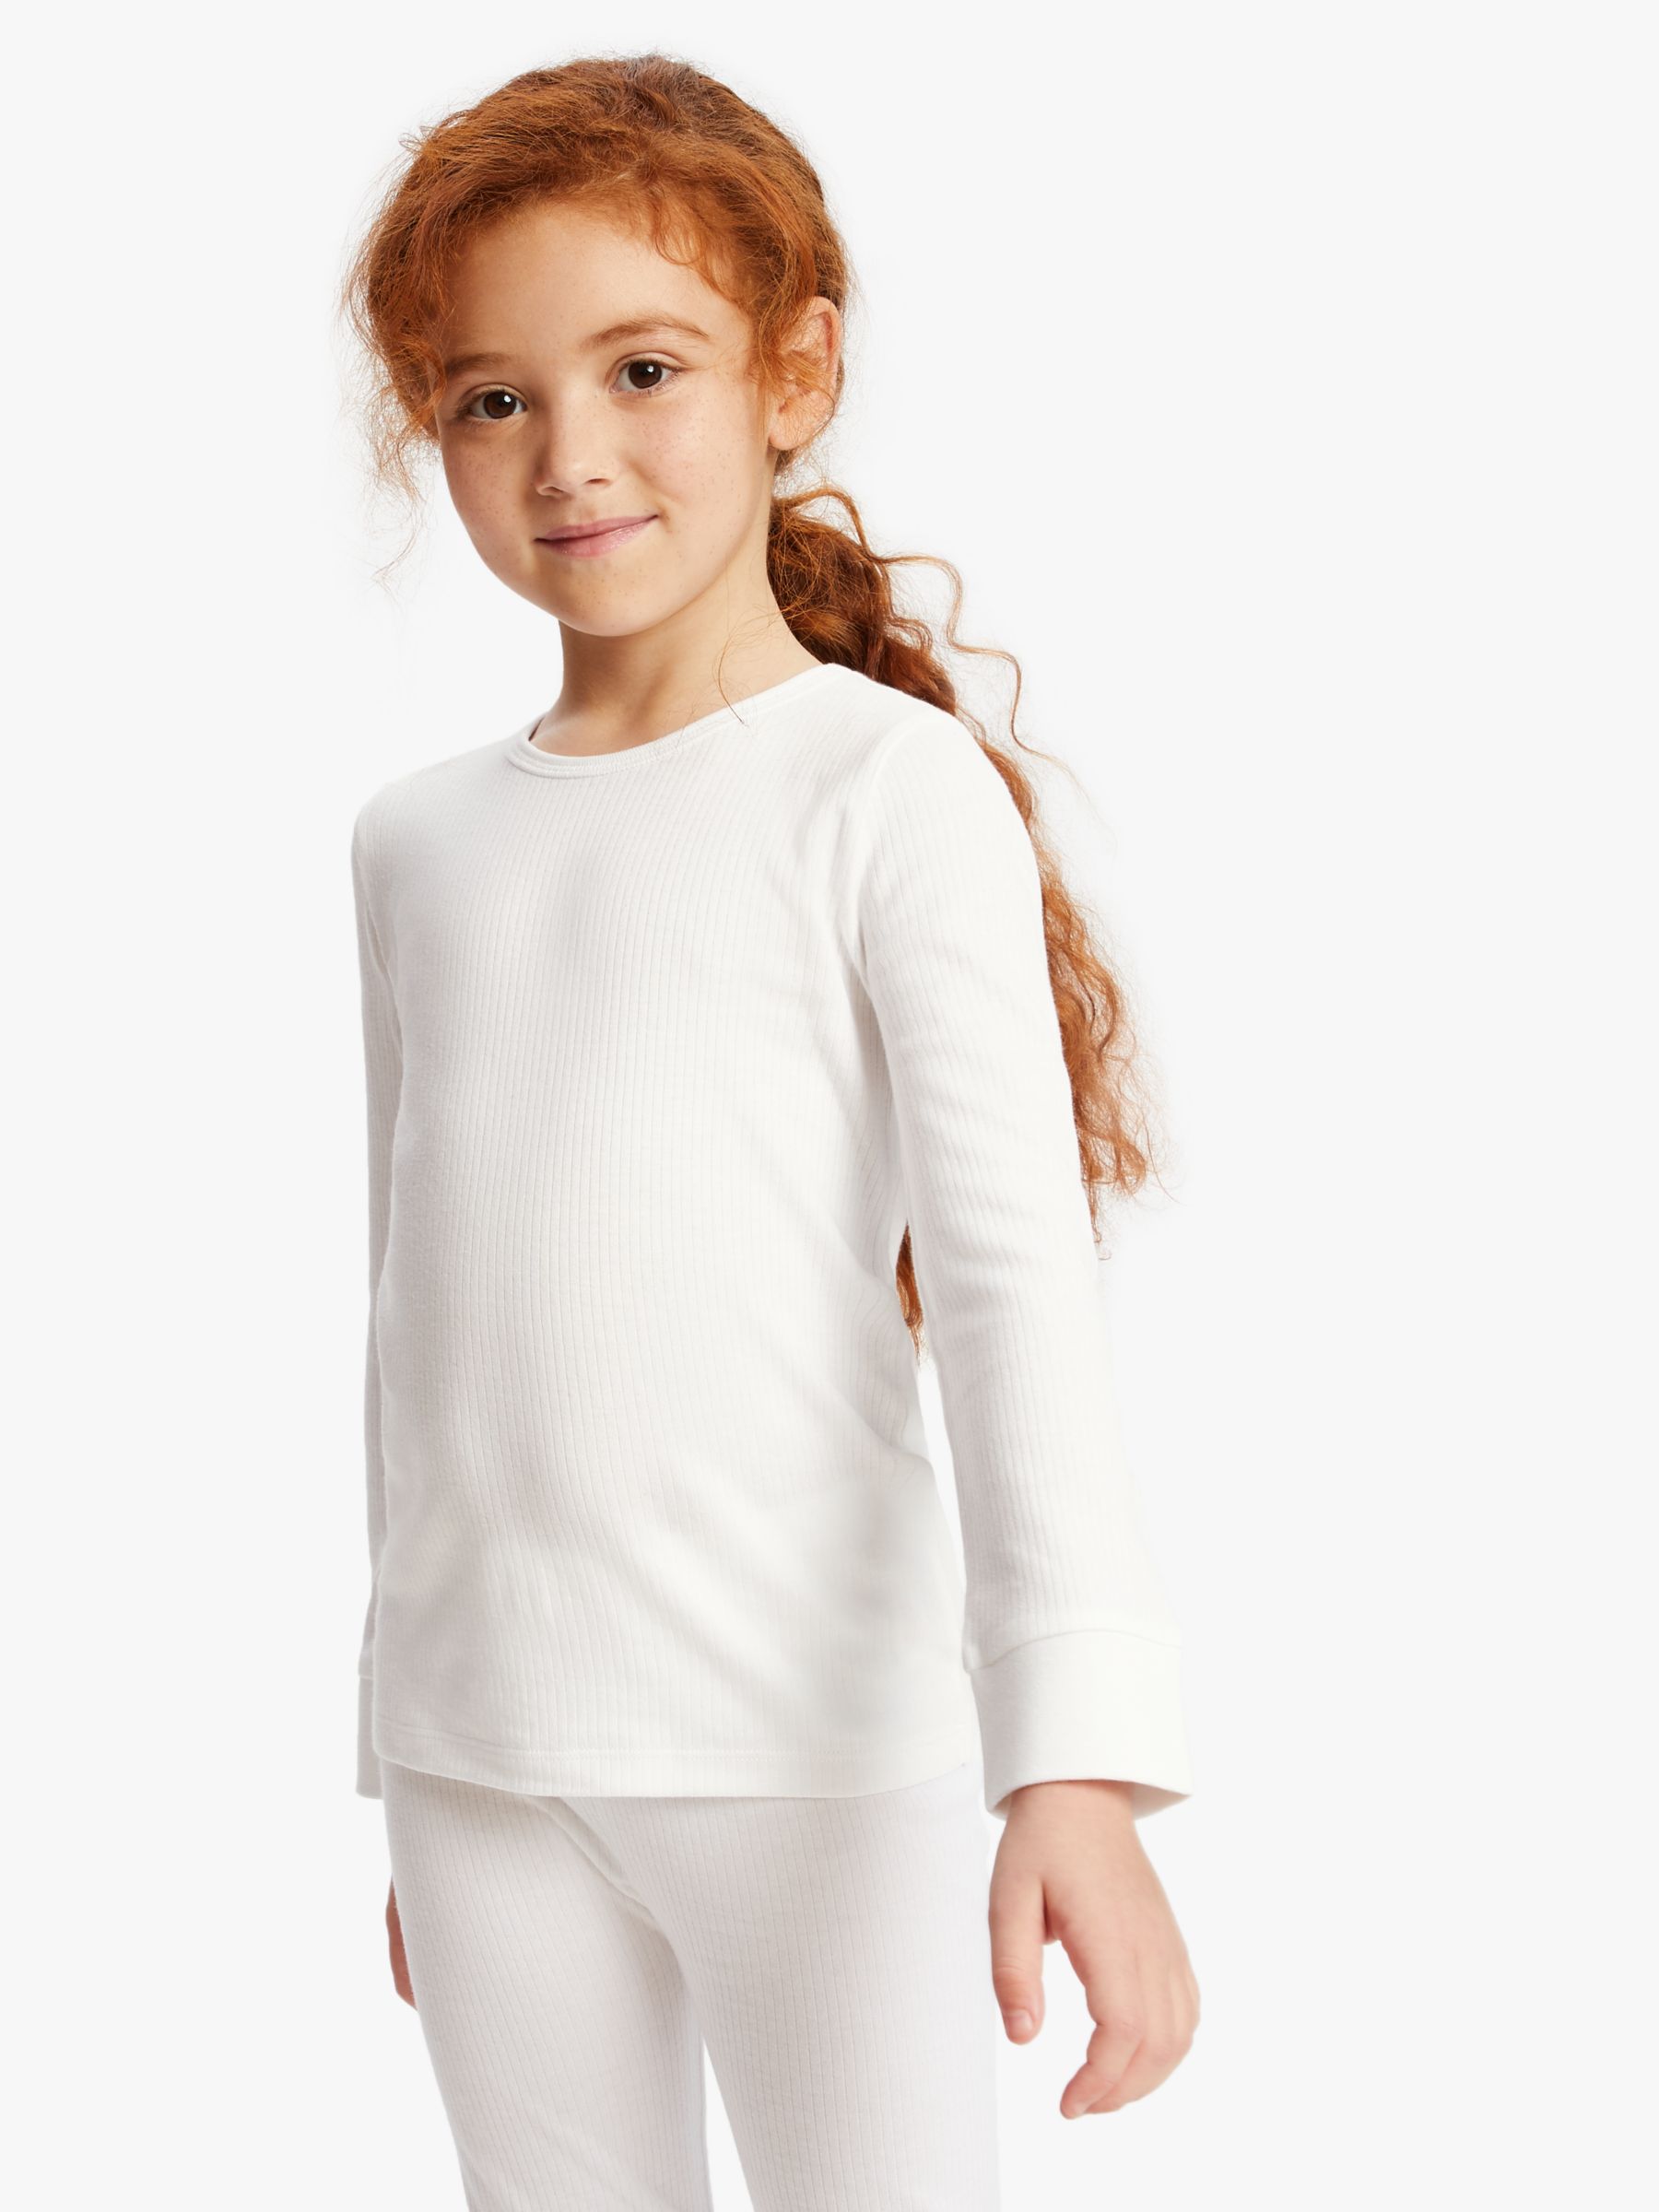 Childrens Thermal Tops Flash Sales